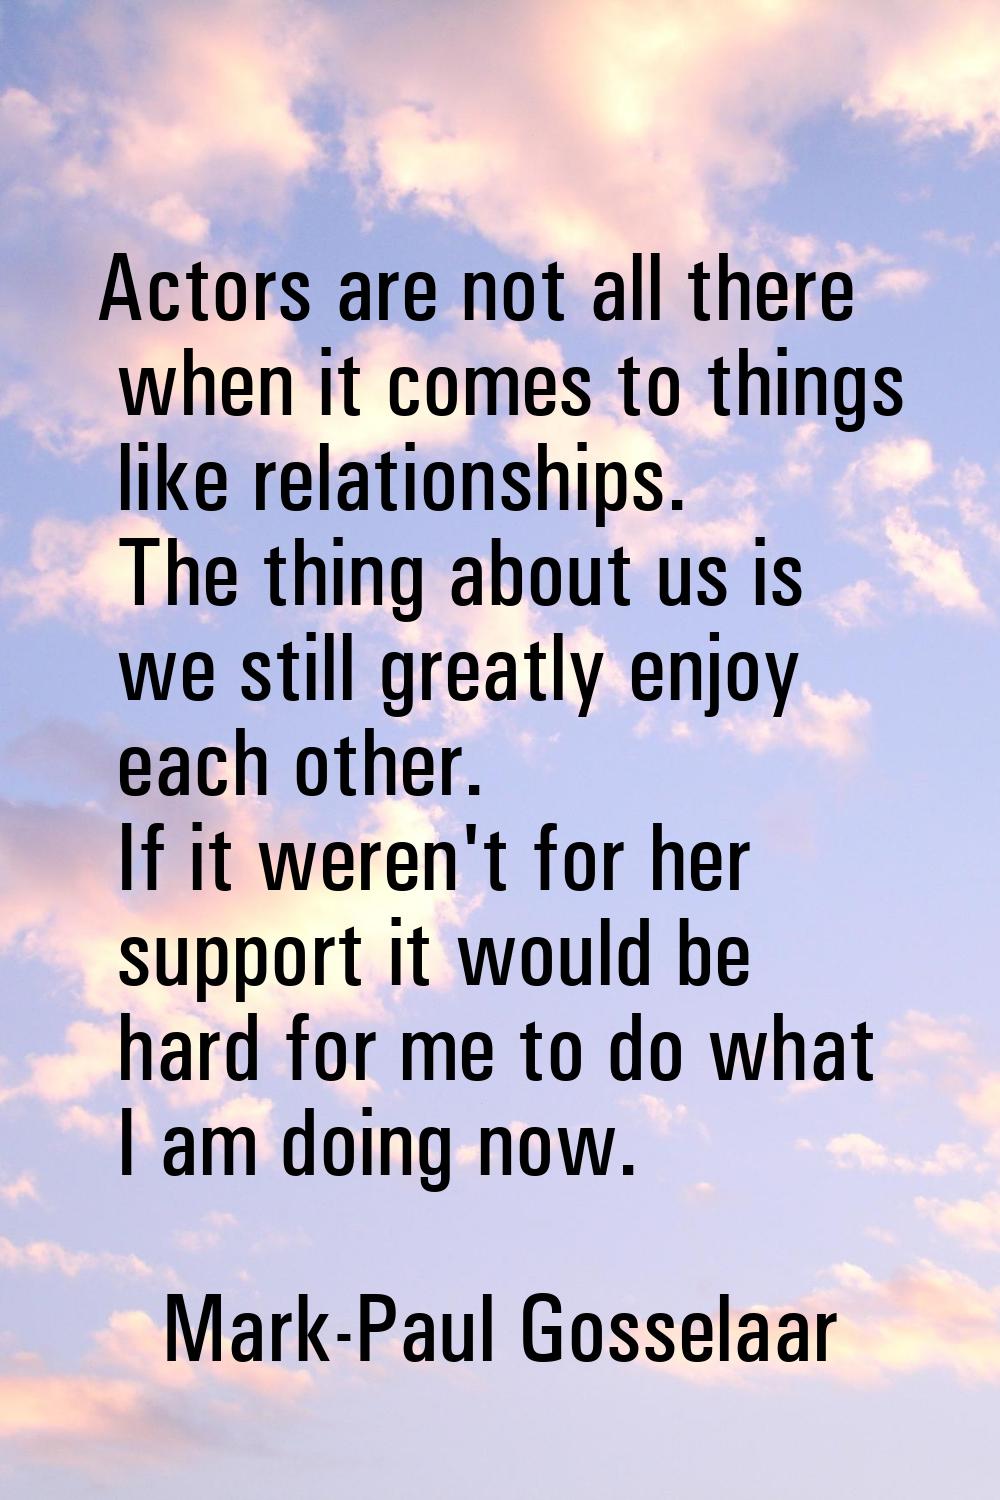 Actors are not all there when it comes to things like relationships. The thing about us is we still